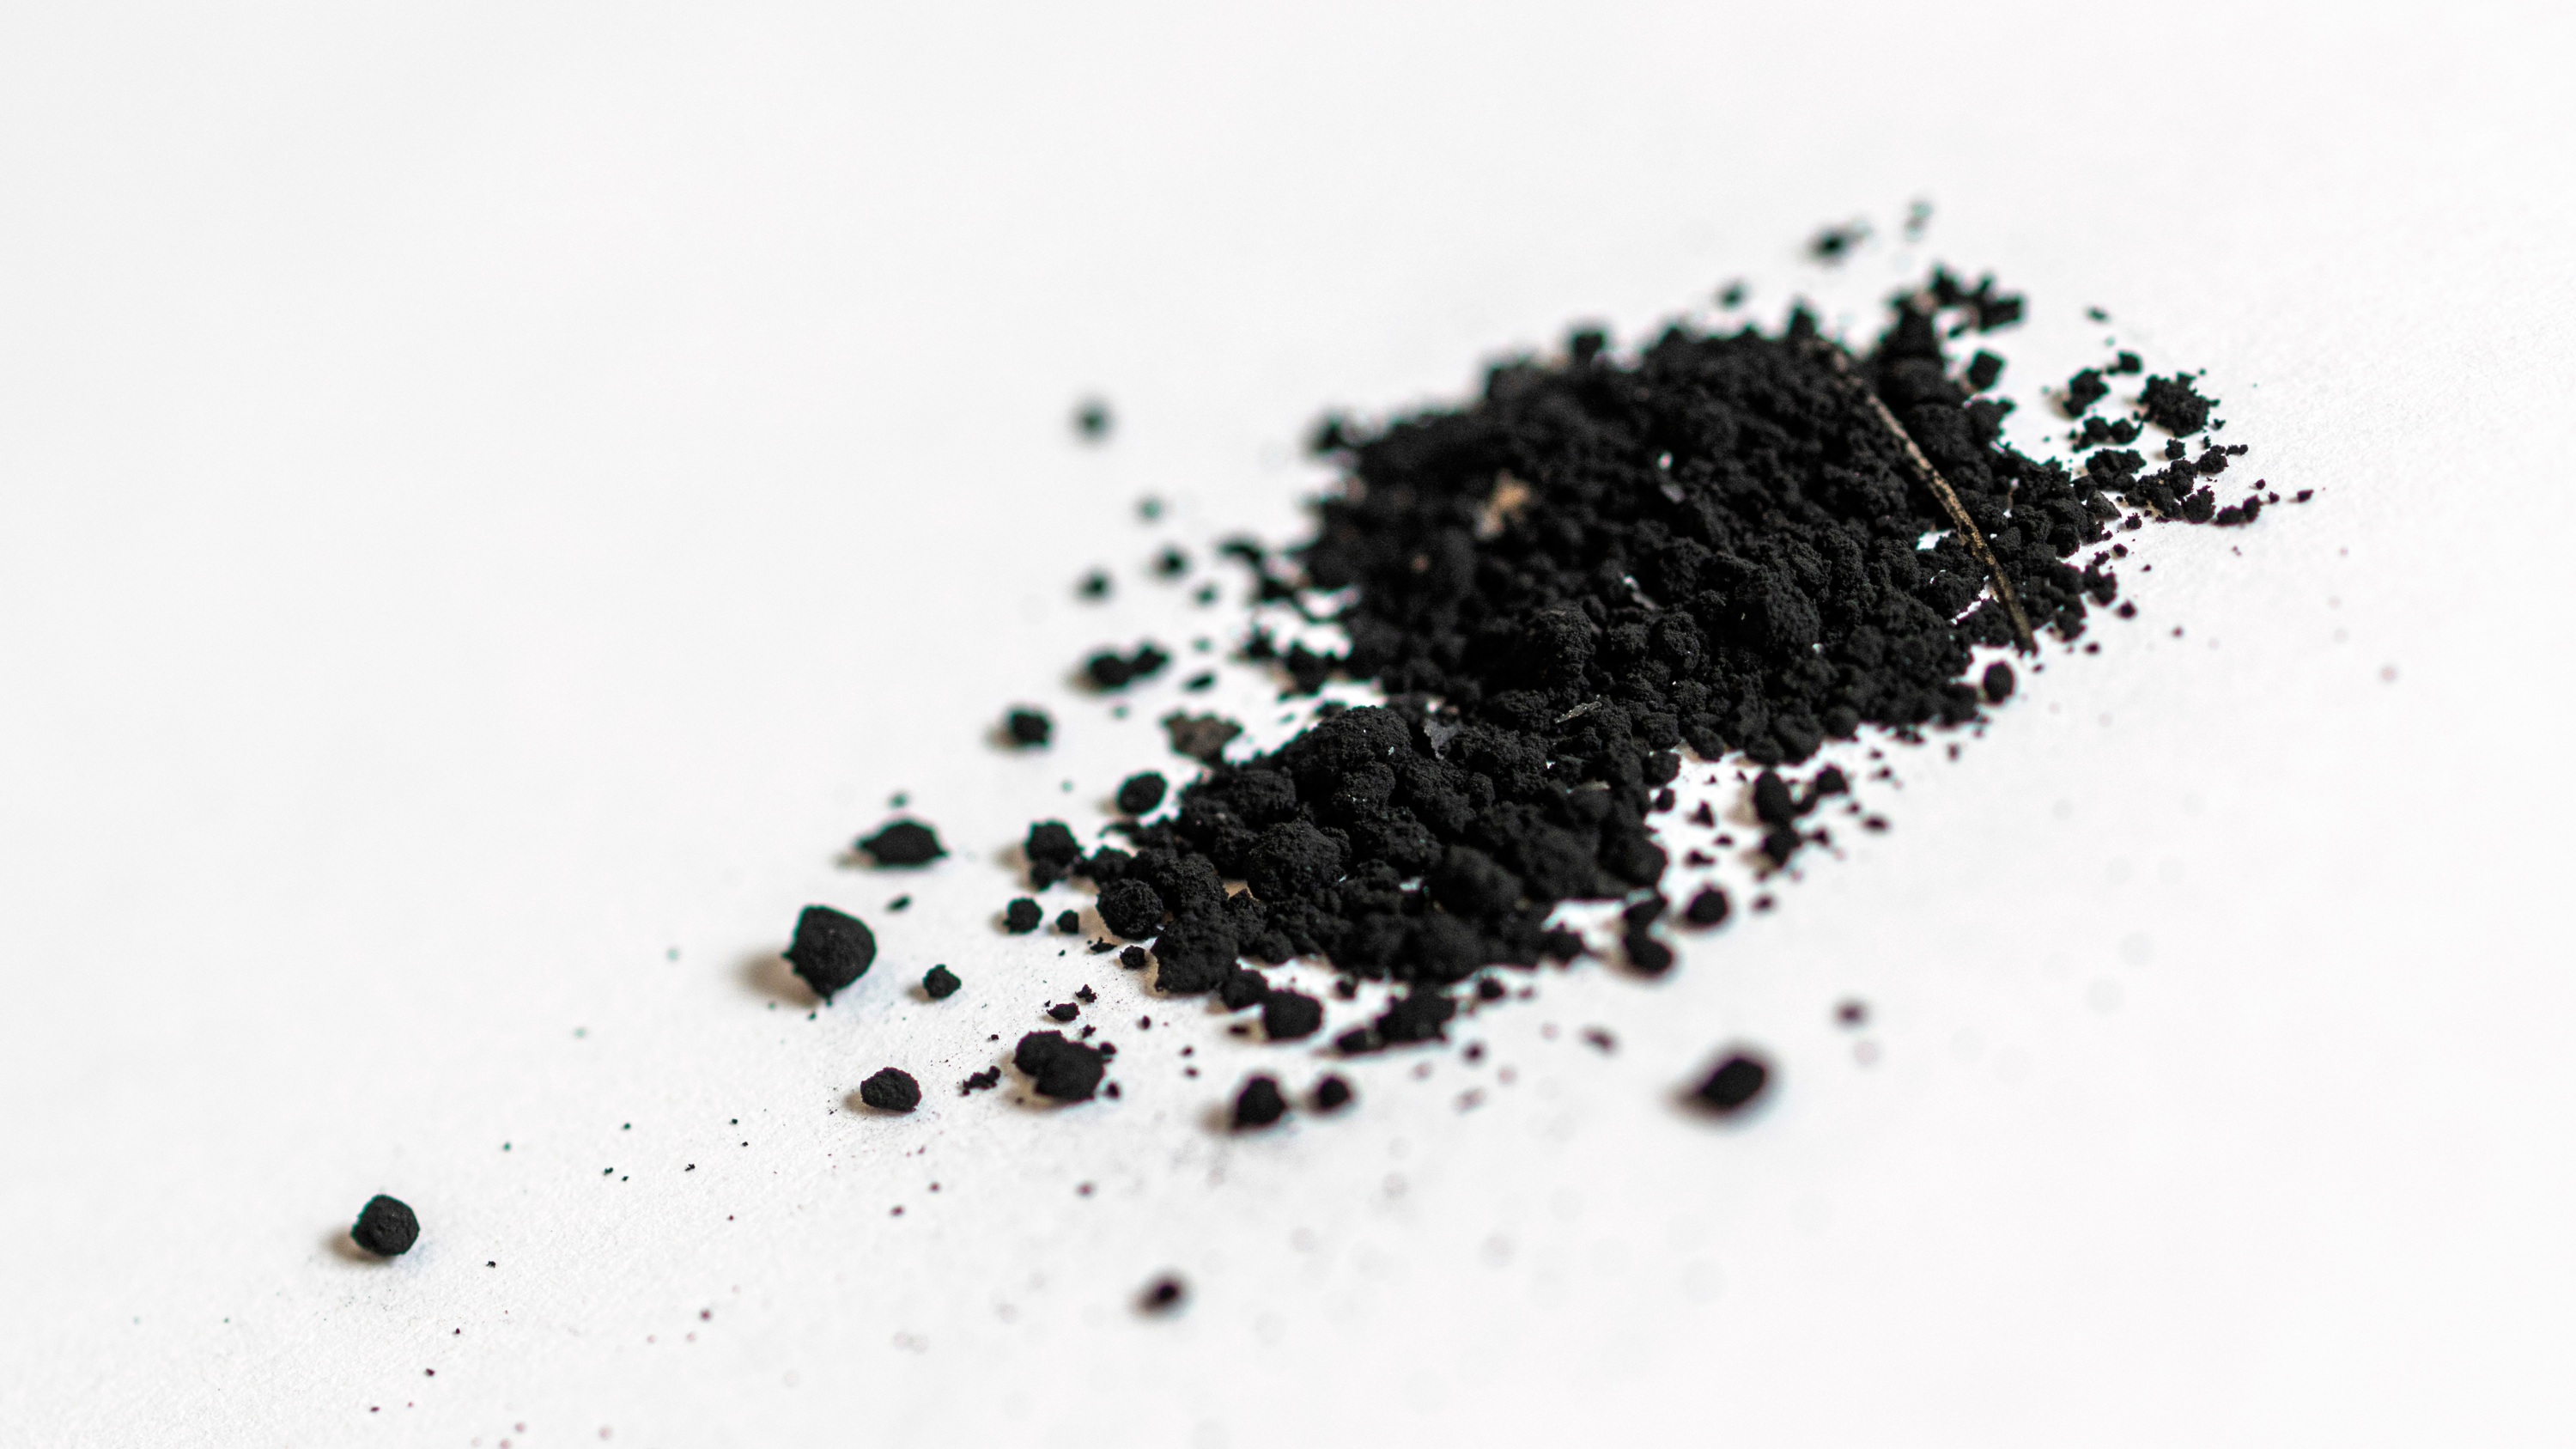 Carbon black, a byproduct of hydrogen production